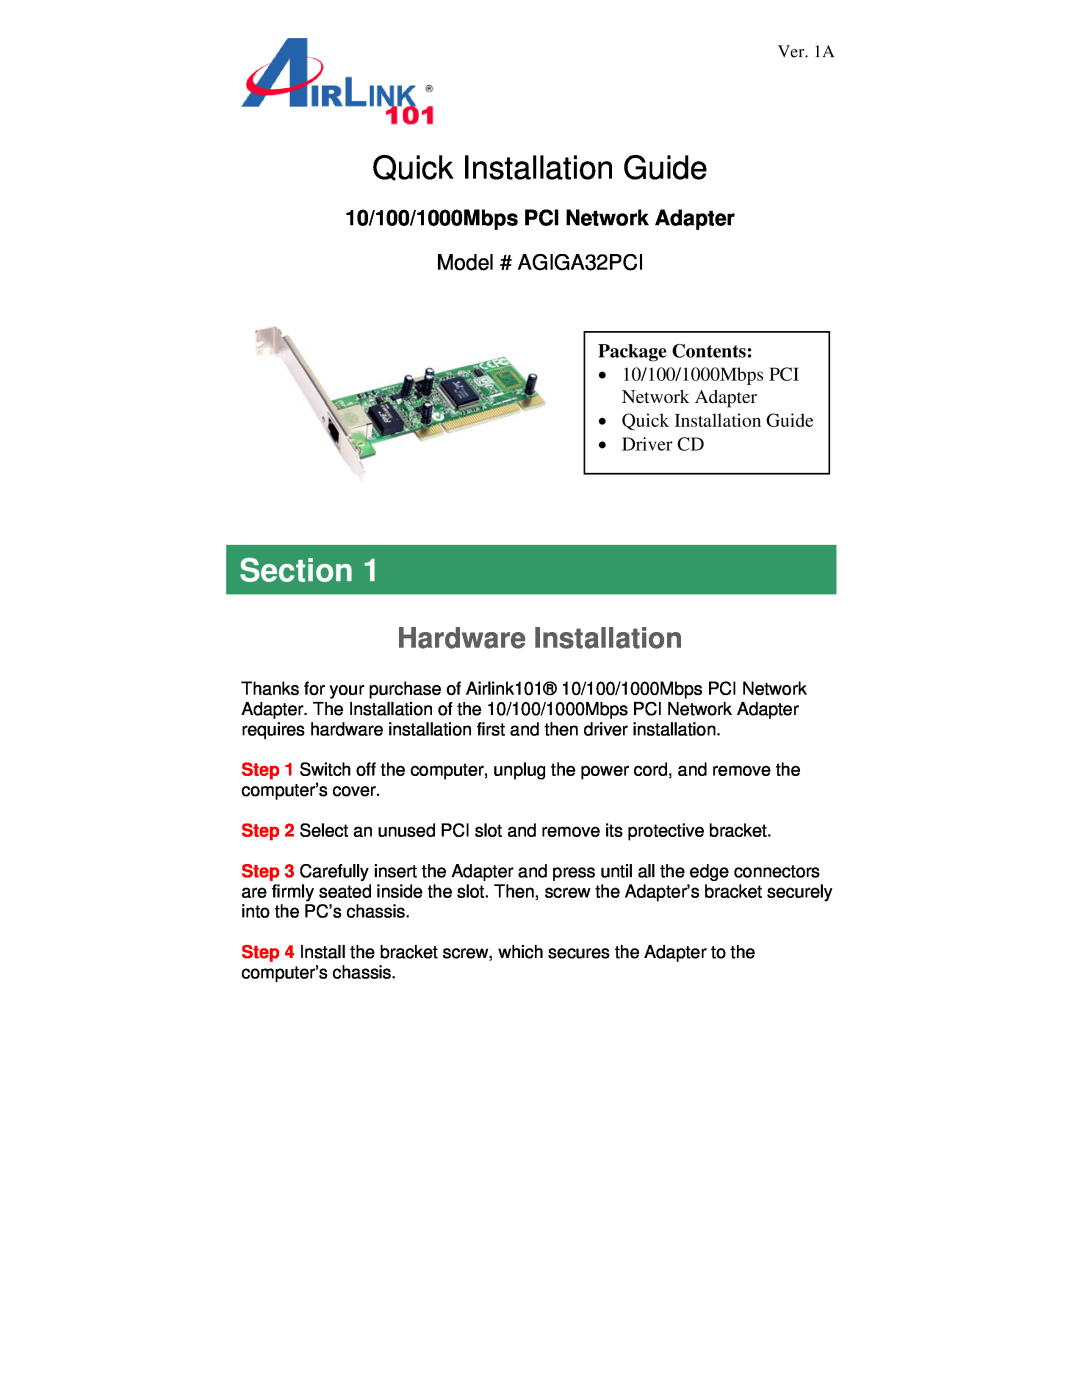 Airlink101 AGIGA32PCI manual Section, Hardware Installation, Quick Installation Guide, 10/100/1000Mbps PCI Network Adapter 